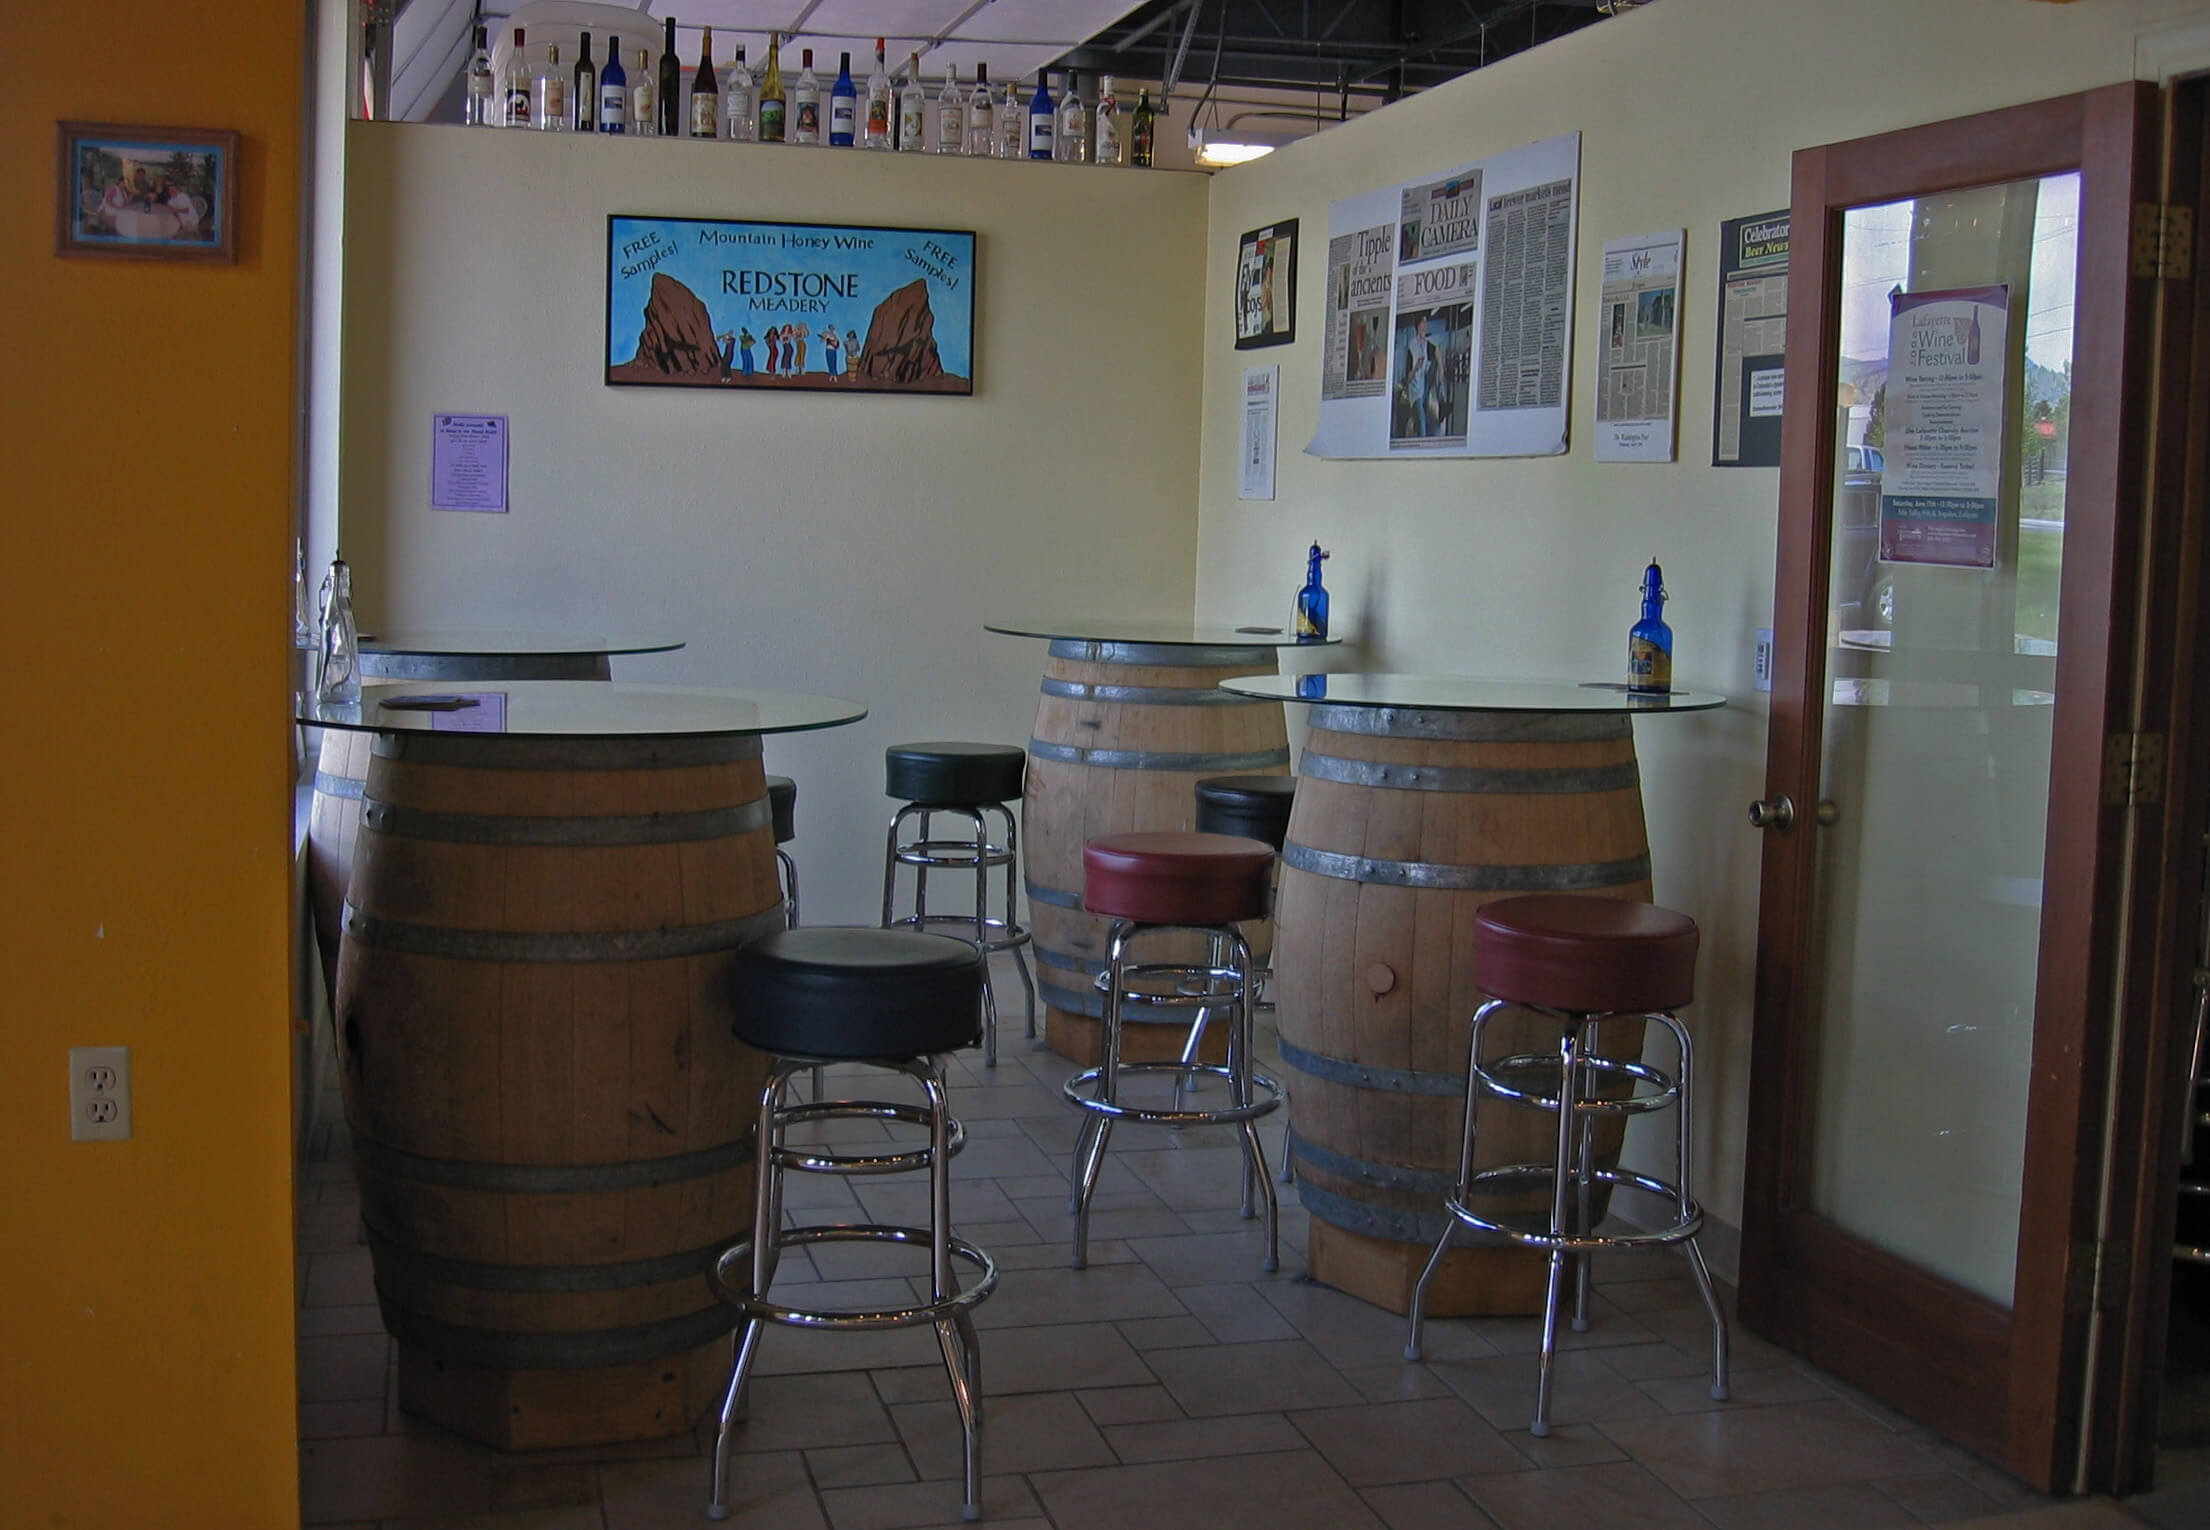 Tasting room with several tables, stools, and Redstone artwork